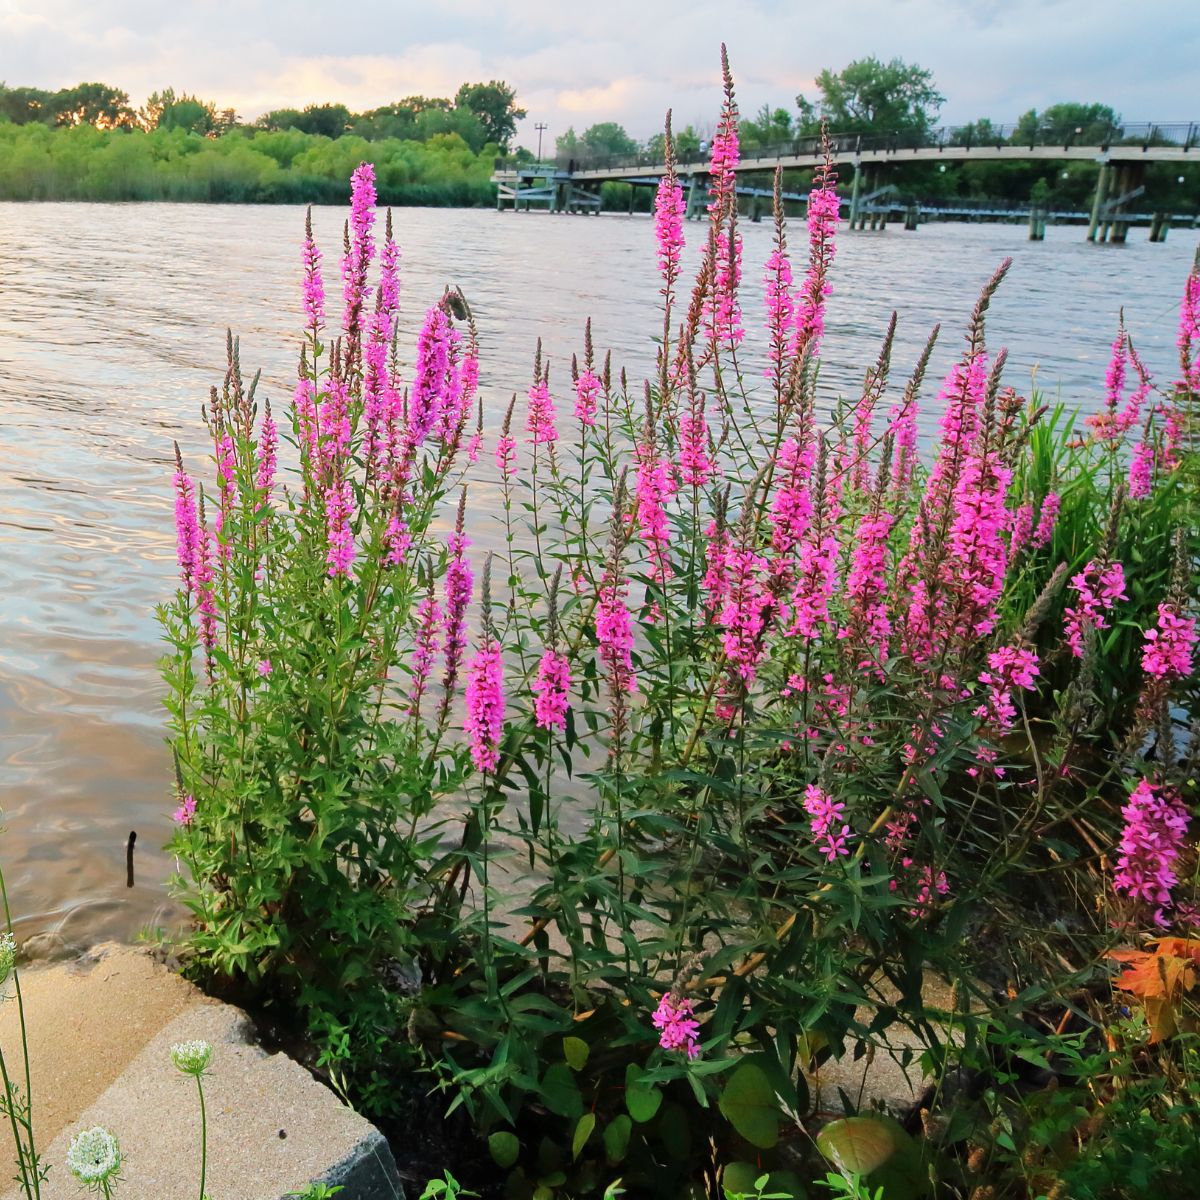 Blooming purple loosestrife plants by a lake.